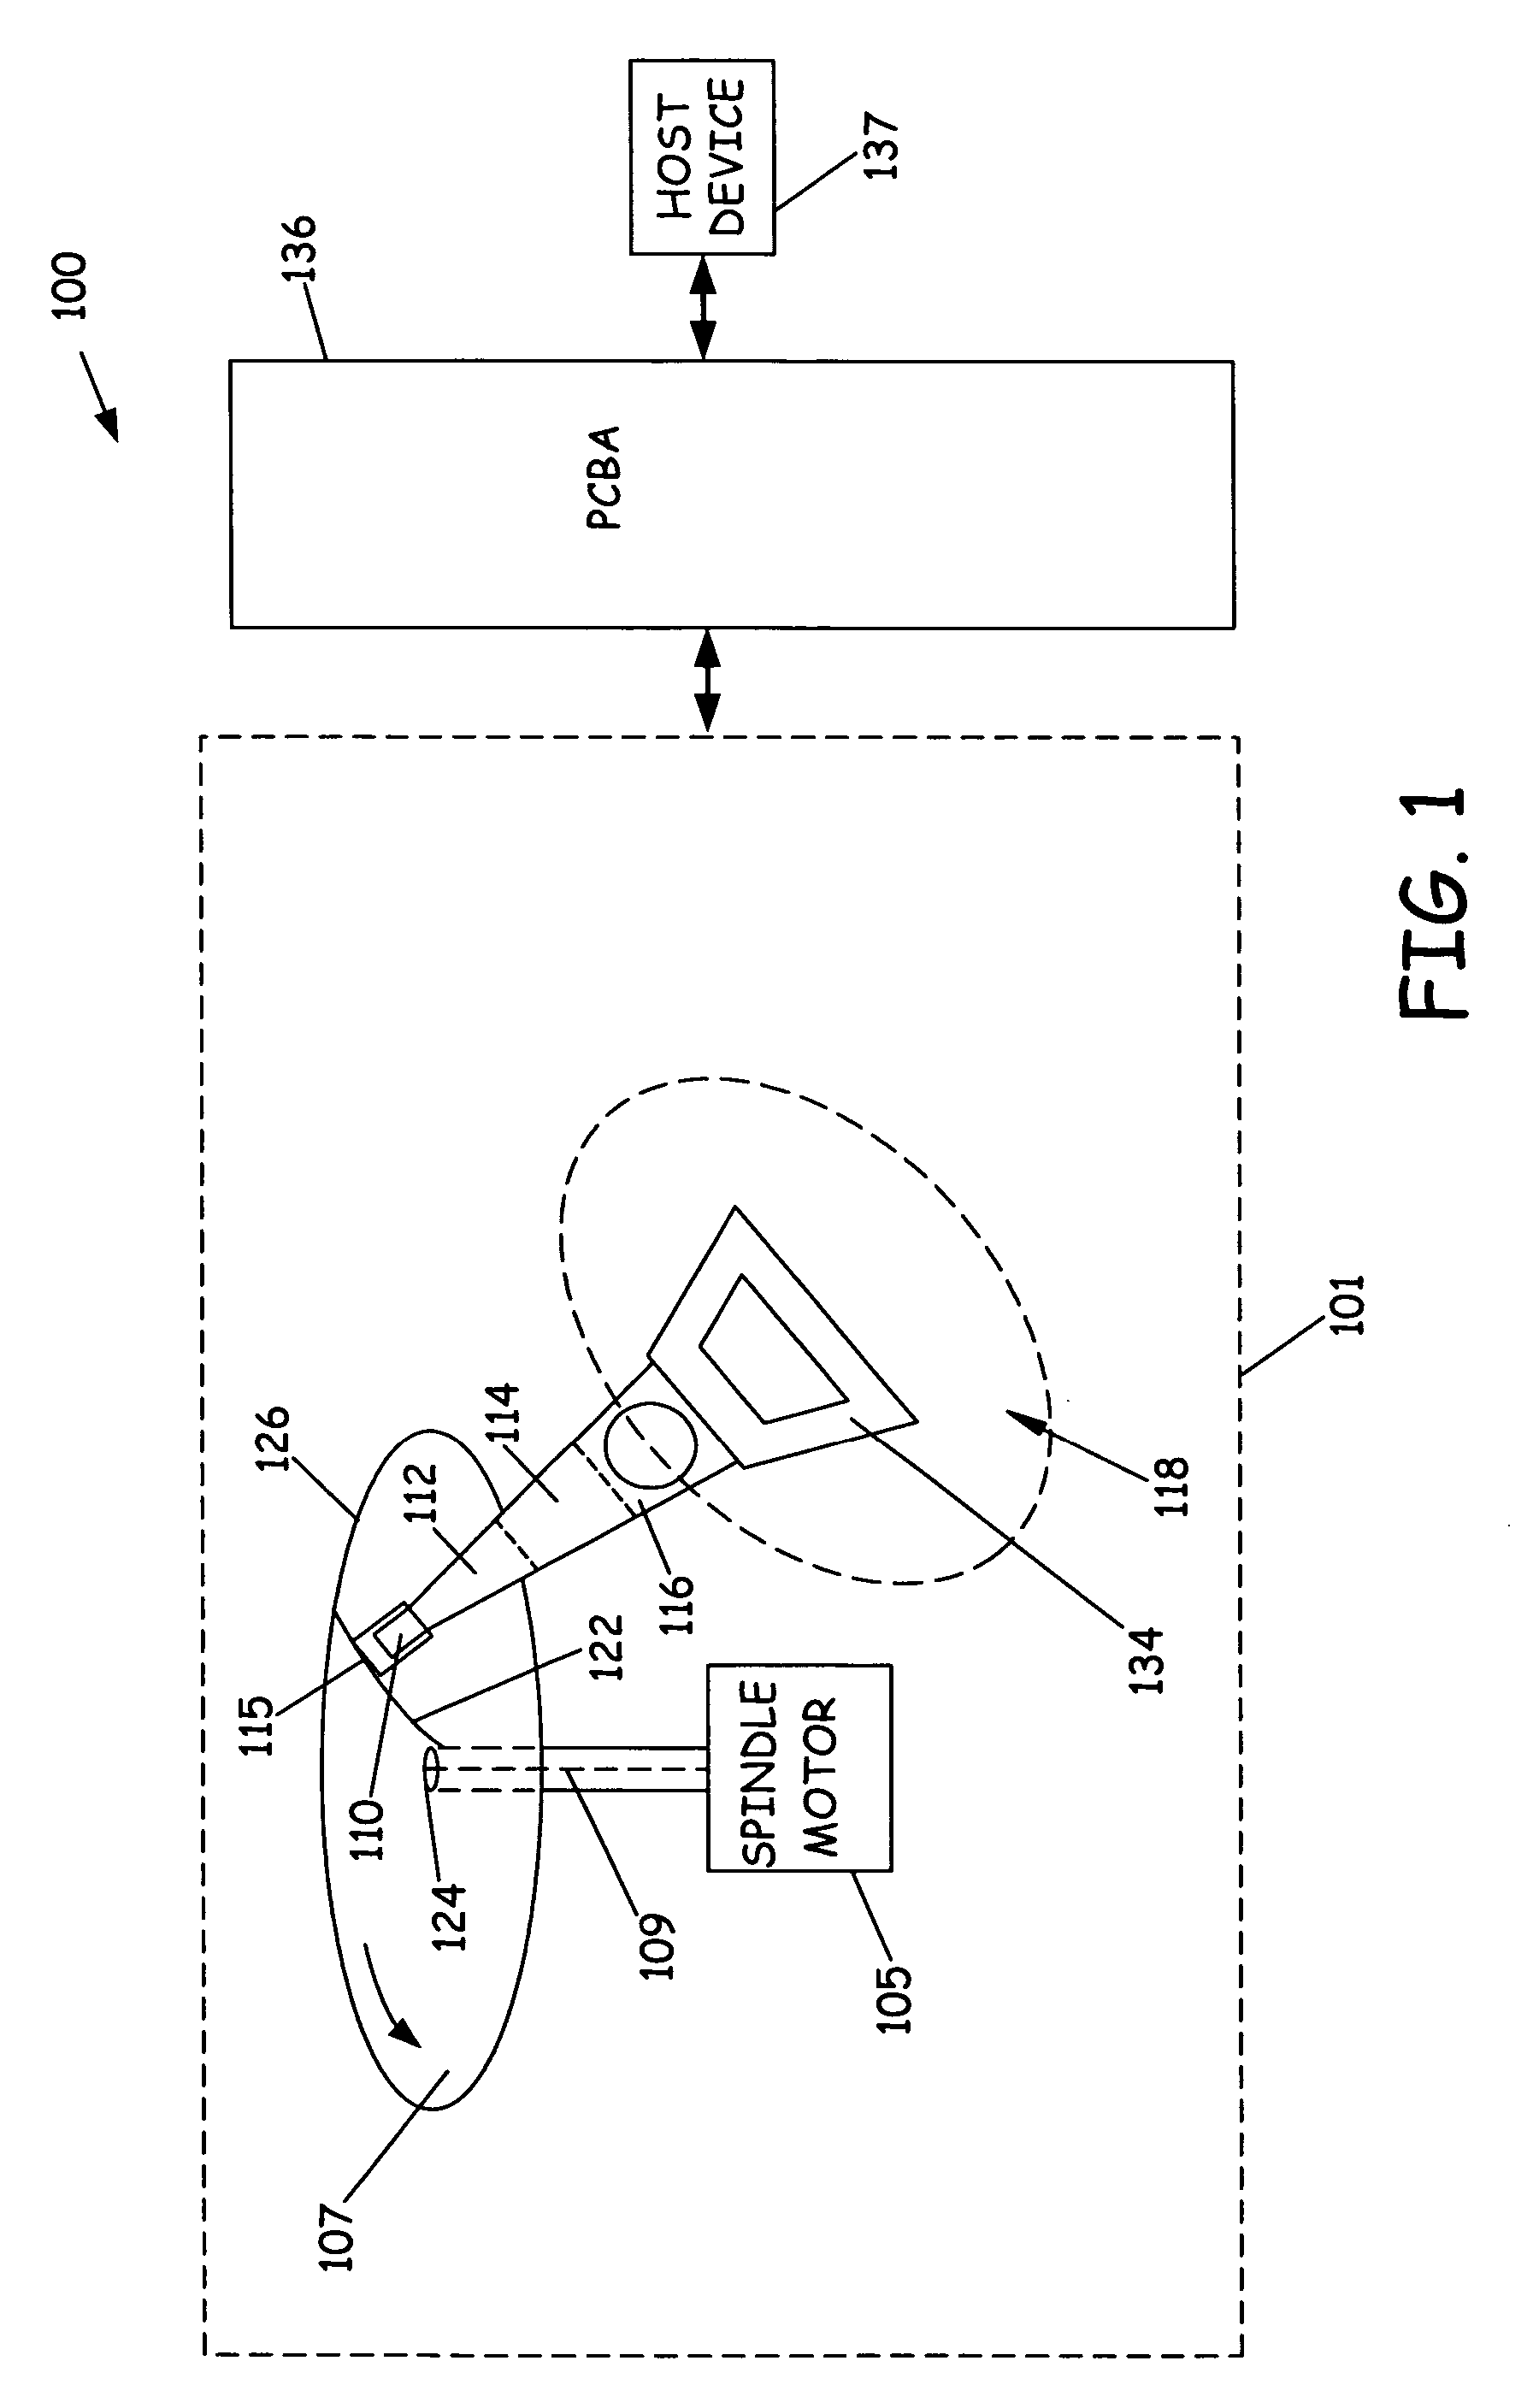 Shock absorbing device for an enclosure